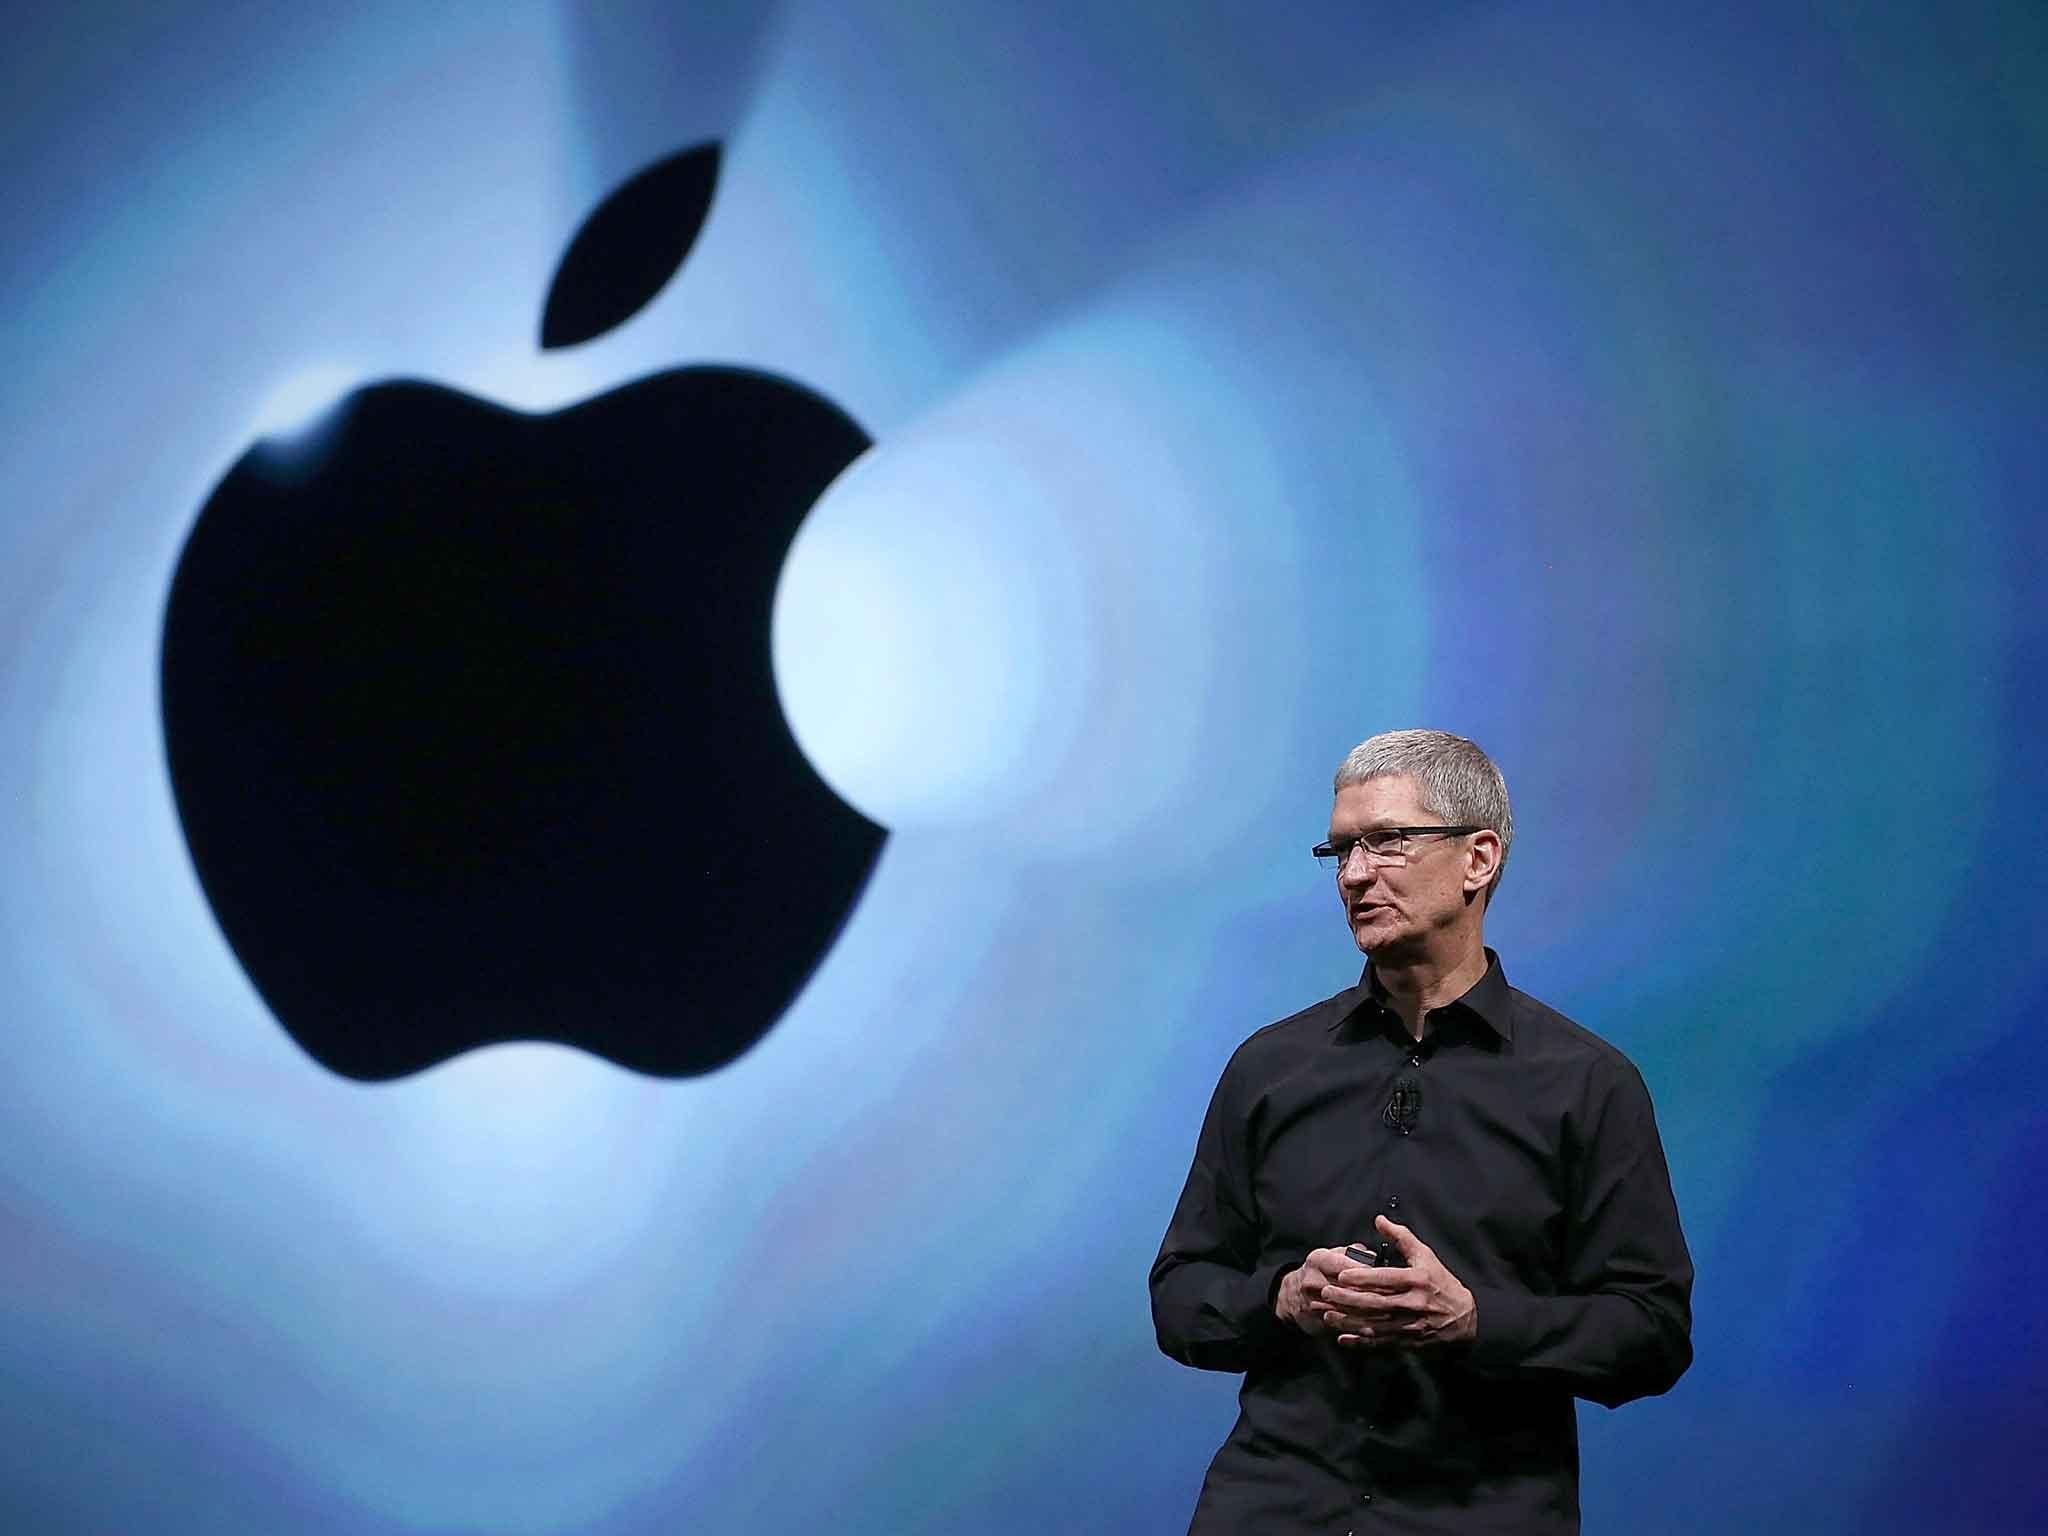 Mr Cook didn't reveal much about the possibility of Apple joining the race for a self-driving car